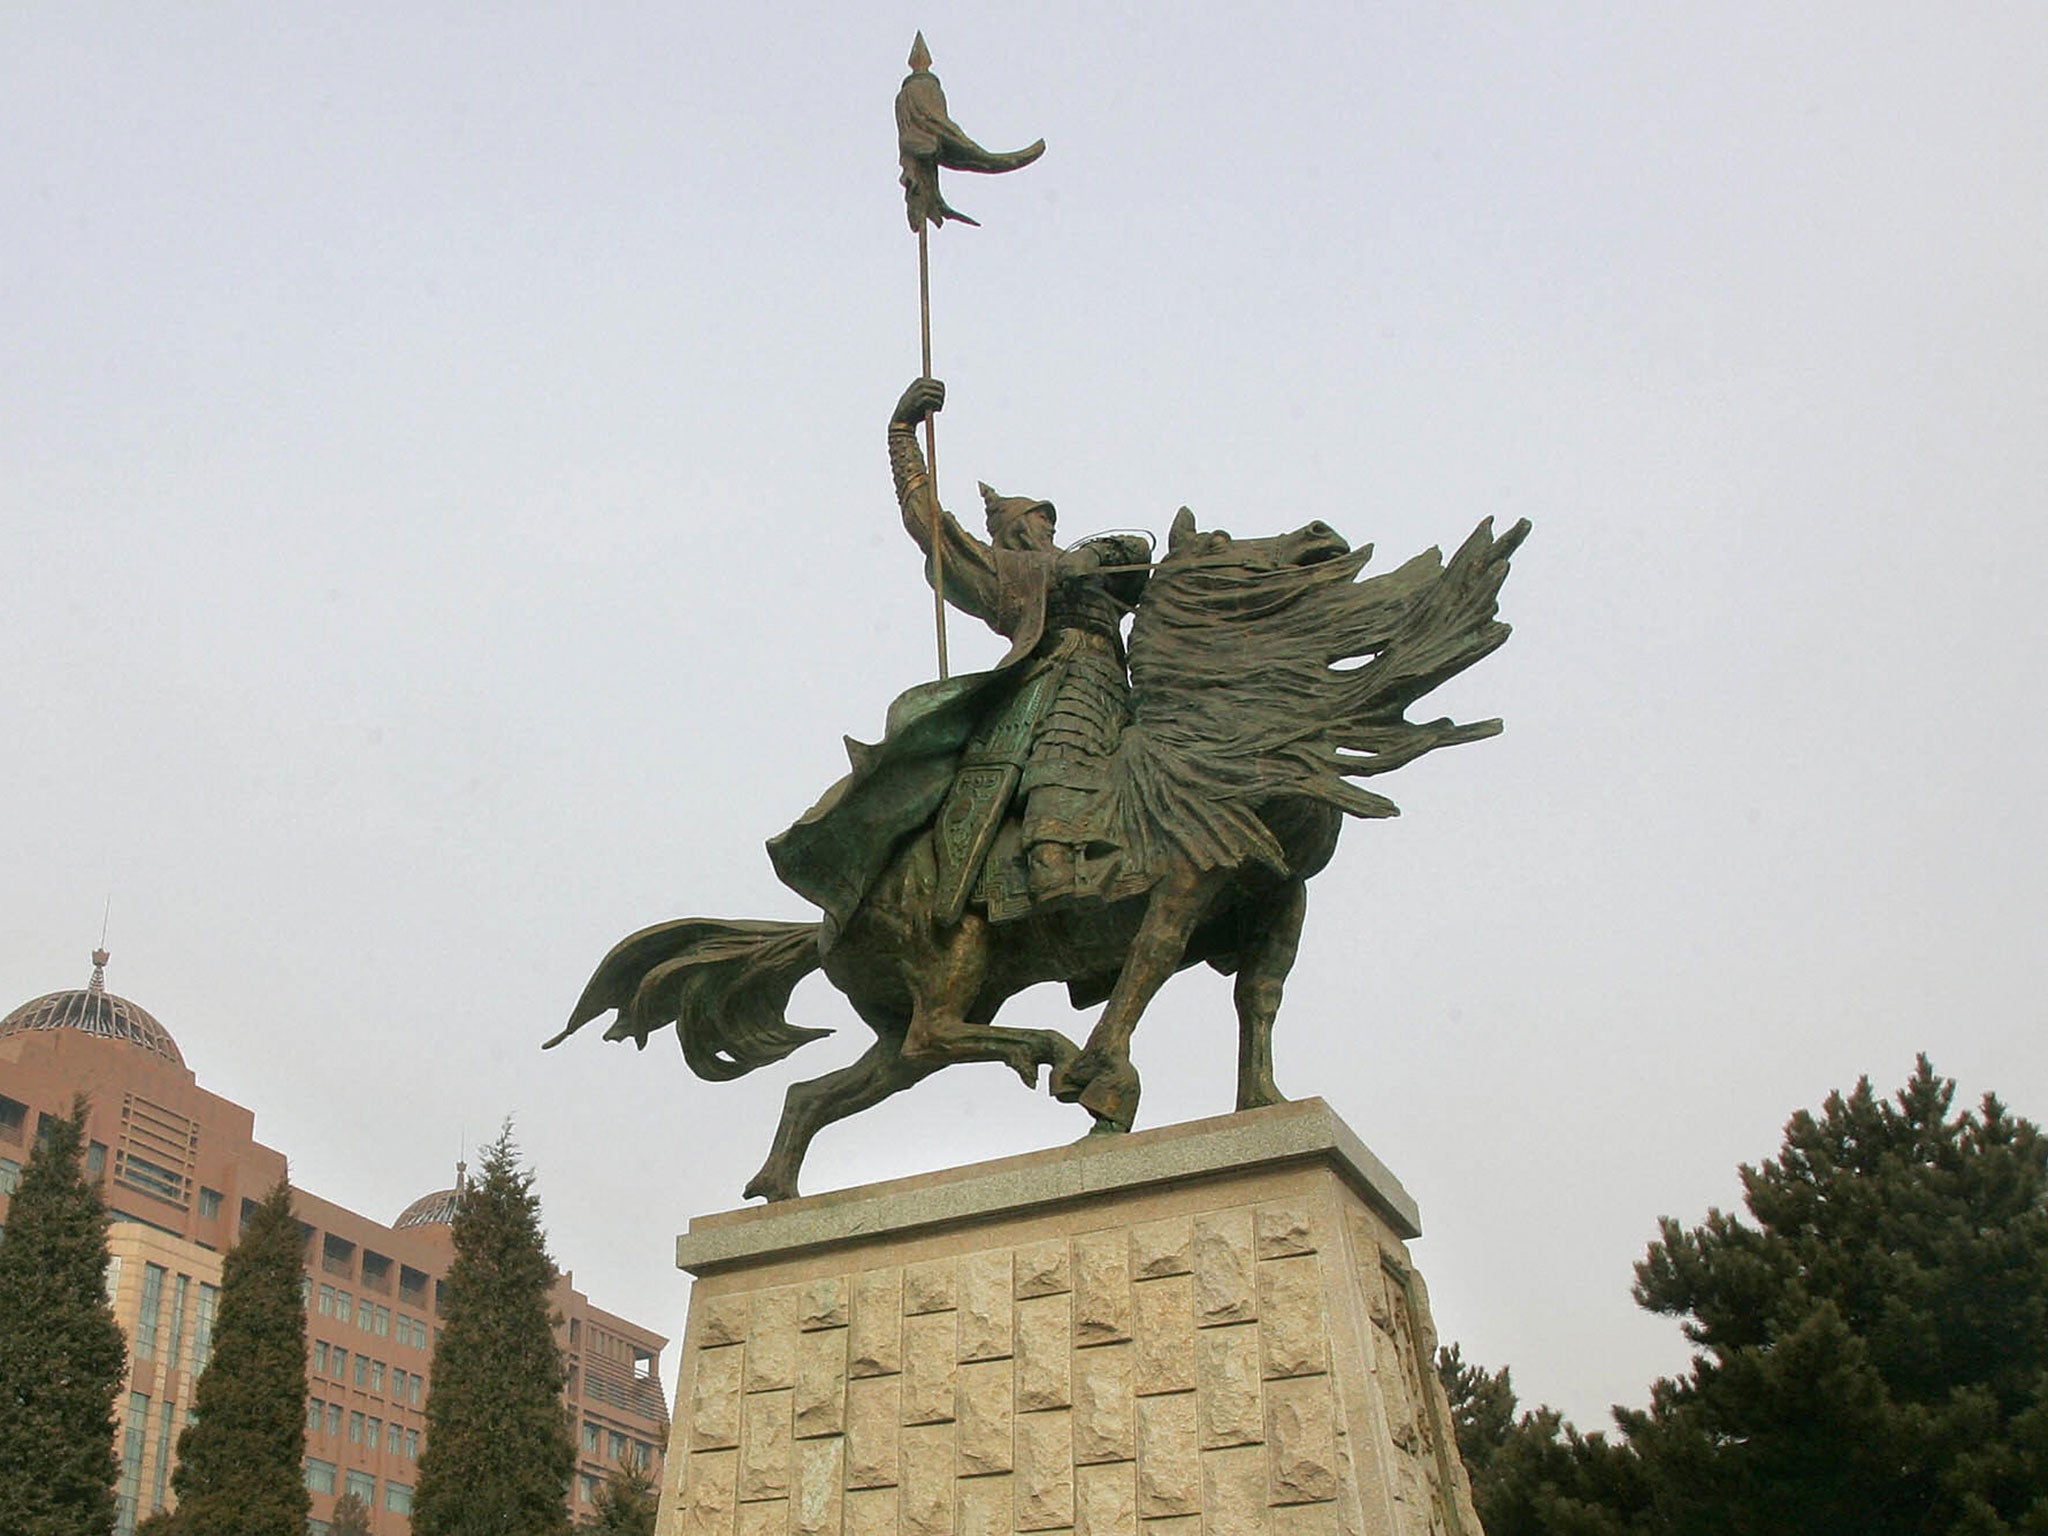 Statue of Genghis Khan on the Inner Mongolia University campus. 20 people – including several from the UK – were wrongly detained on suspicion of being terrorists after watching a 40-minute BBC documentary on Genghis Khan